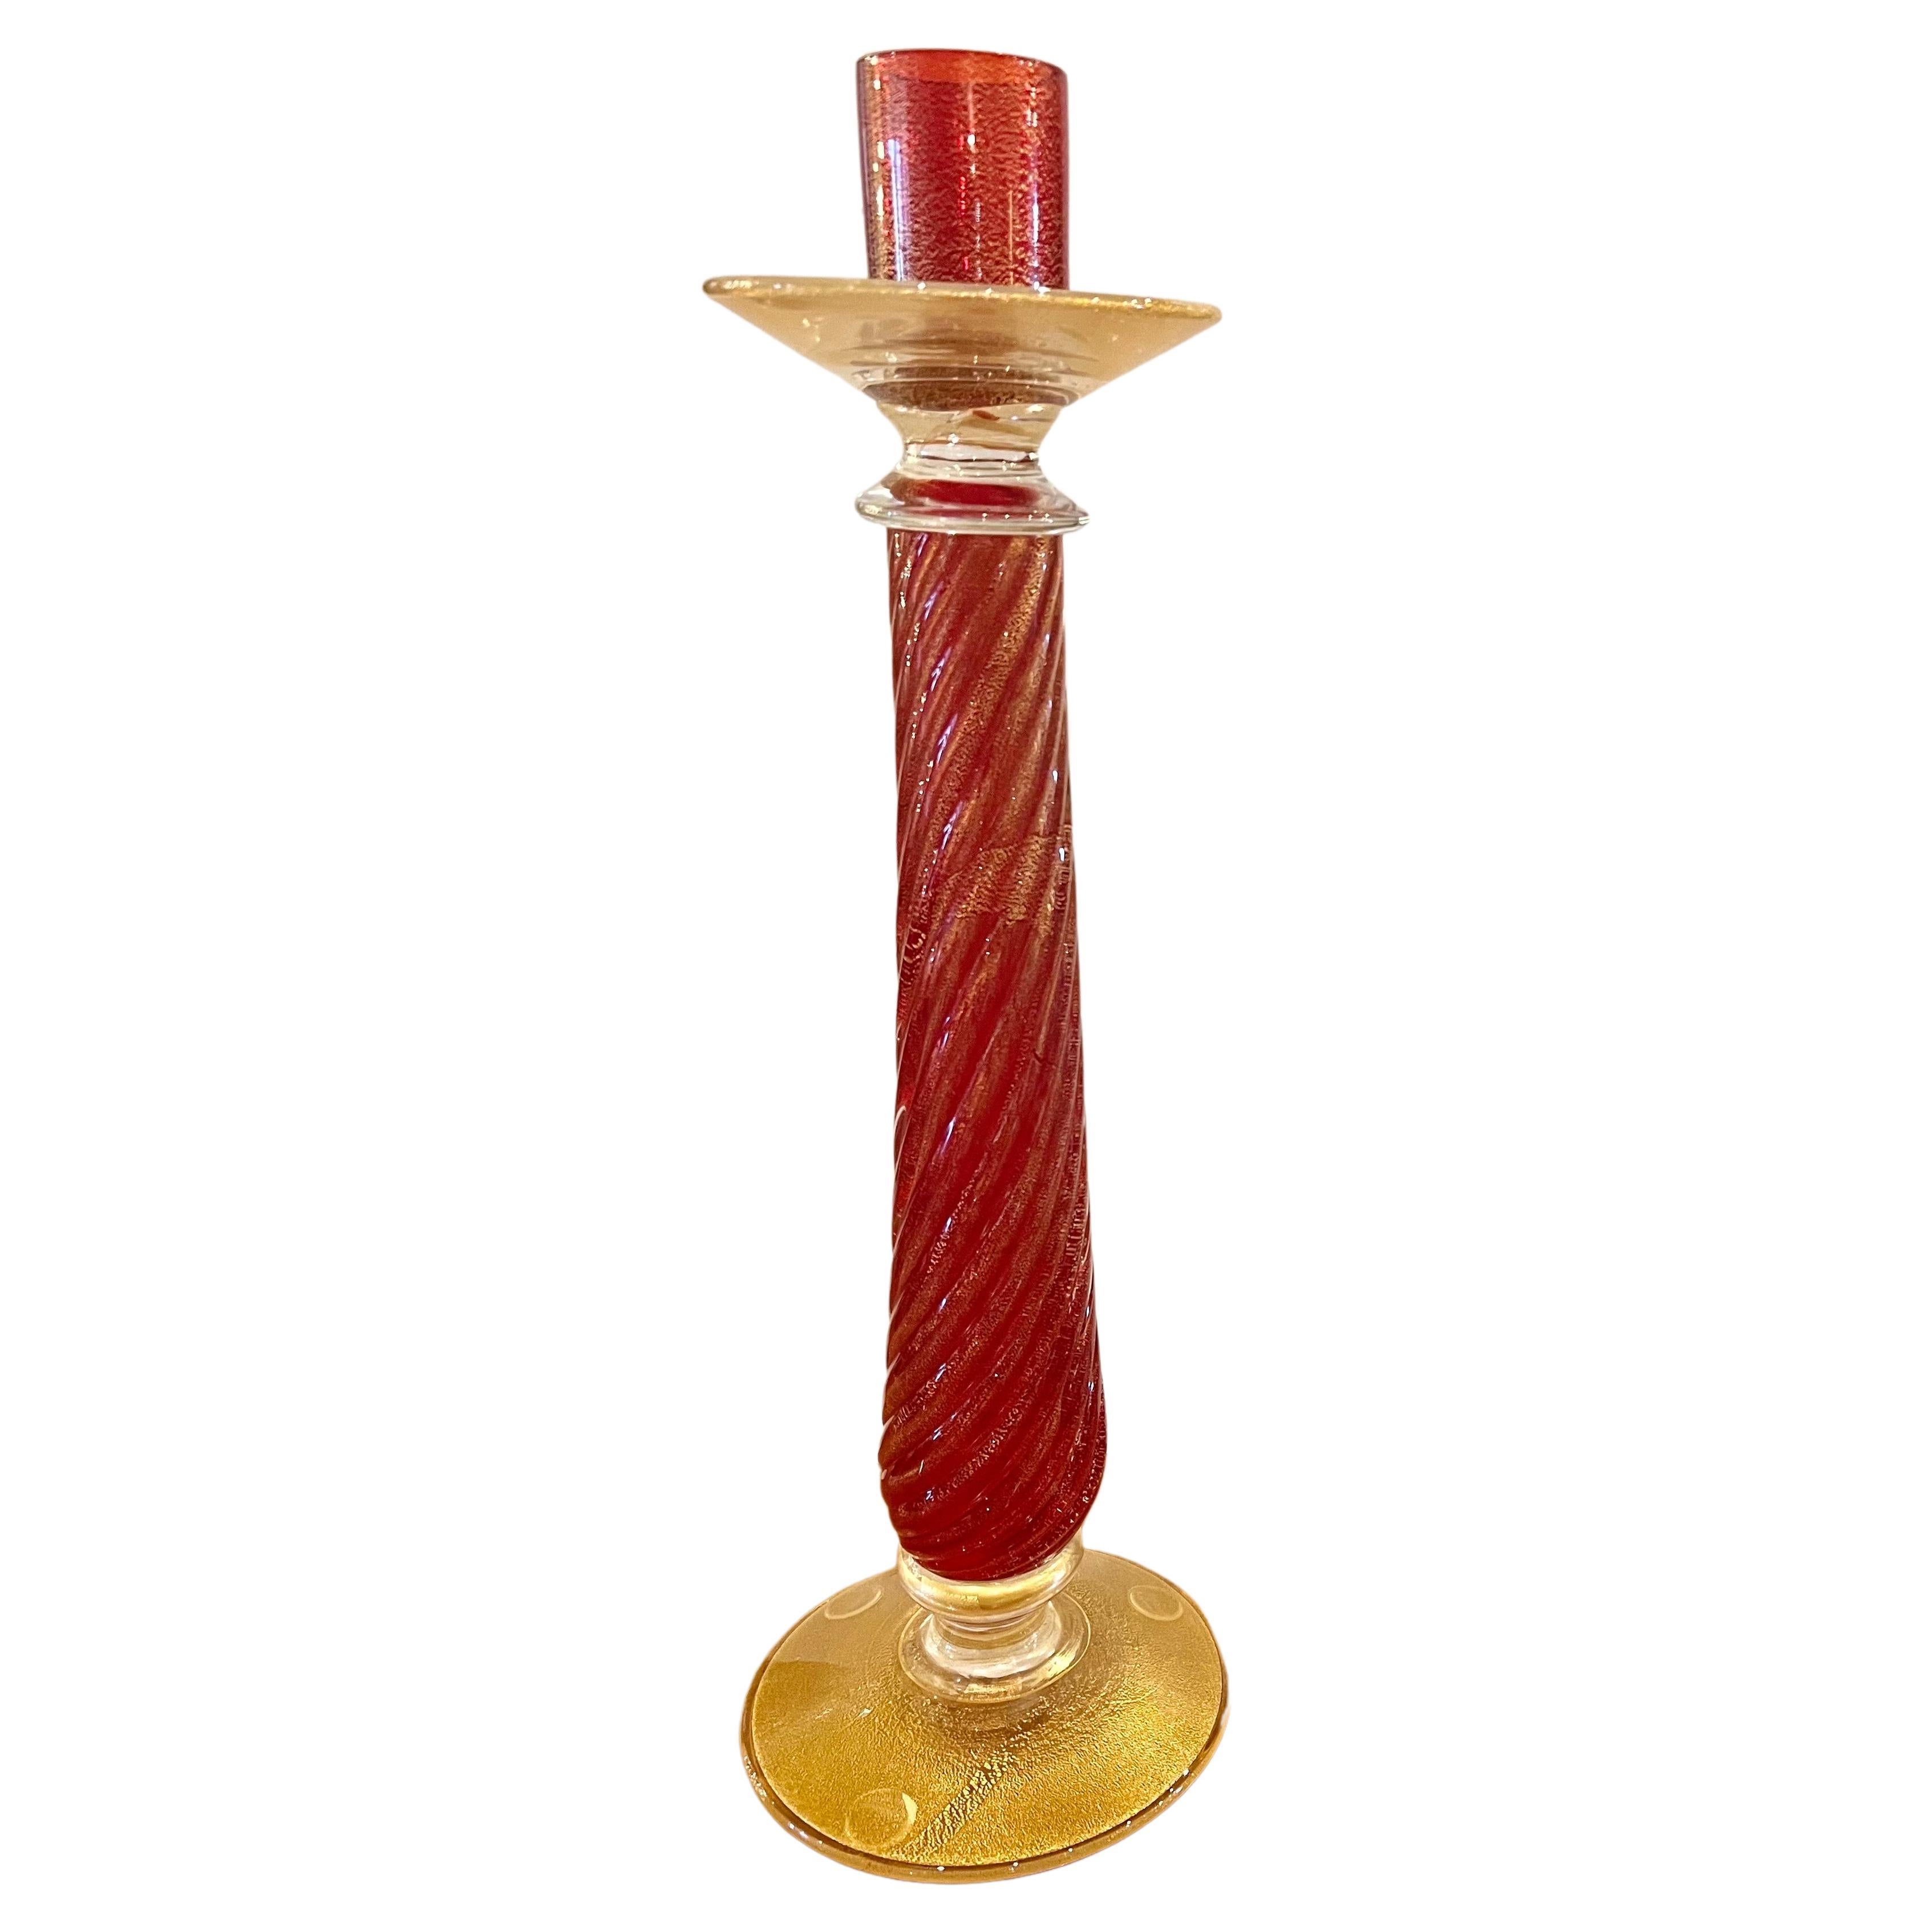 Monumental Ruby Gold Tall Murano CandleStick by Barovier & Toso Venitian Glass In Excellent Condition For Sale In San Diego, CA